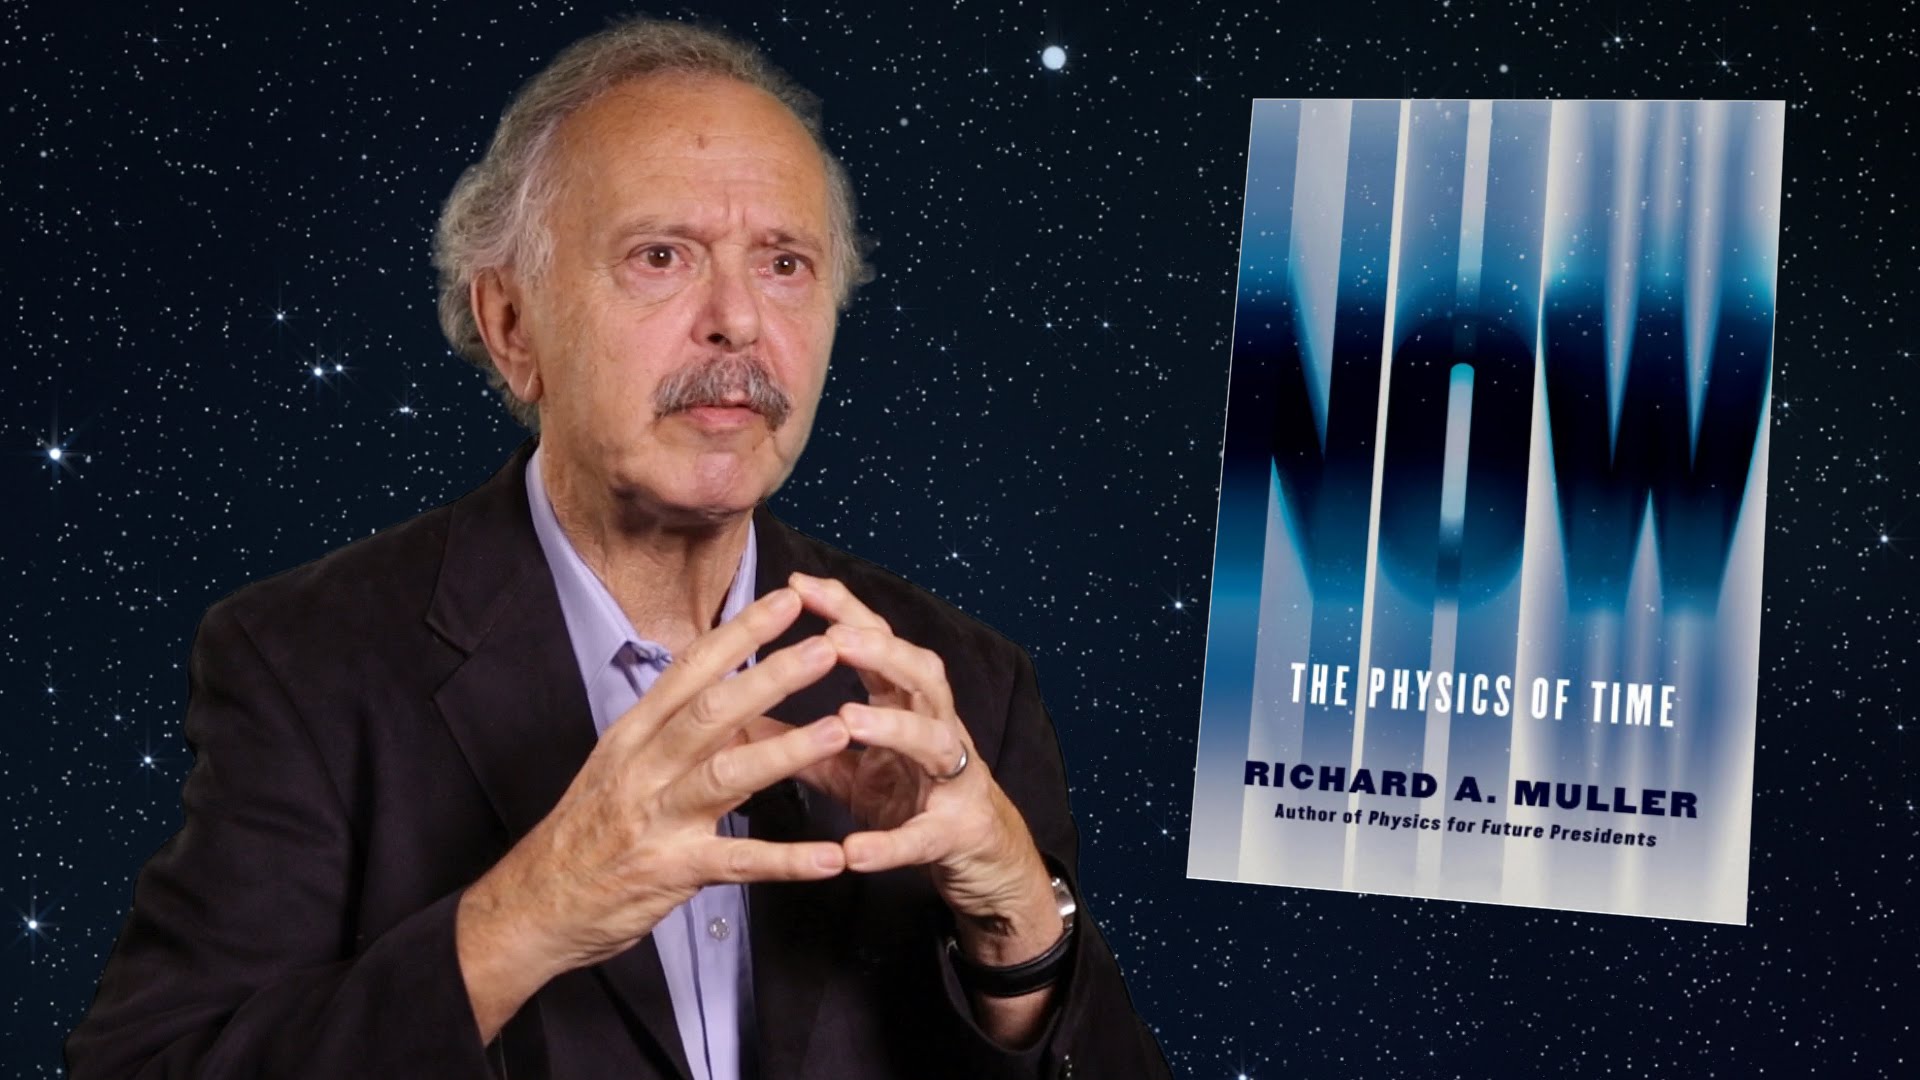 [Video] Physicist’s New Theory Explains Why Time Travel Is Not Possible